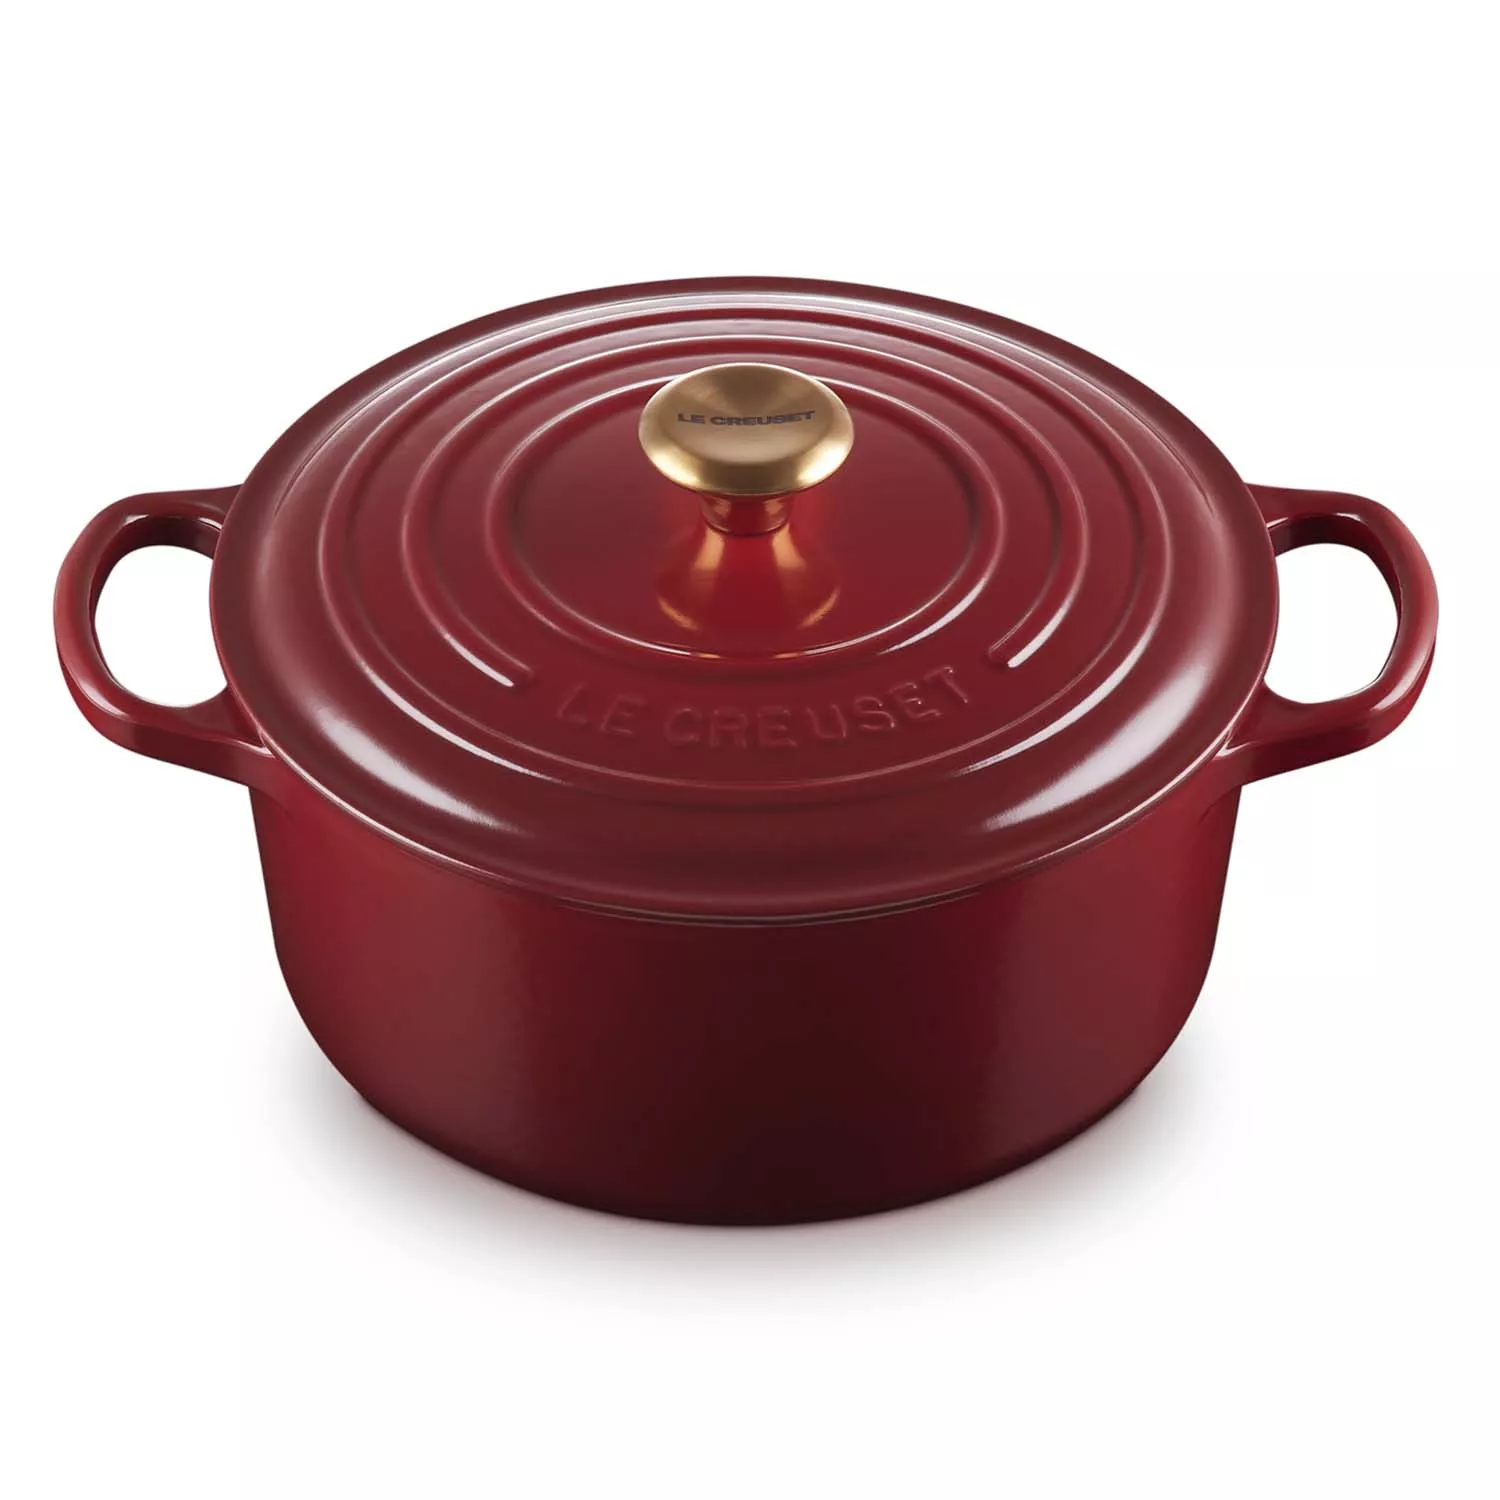 Le Creuset 3.5 Quart Round Dutch Oven — Review and Information. 